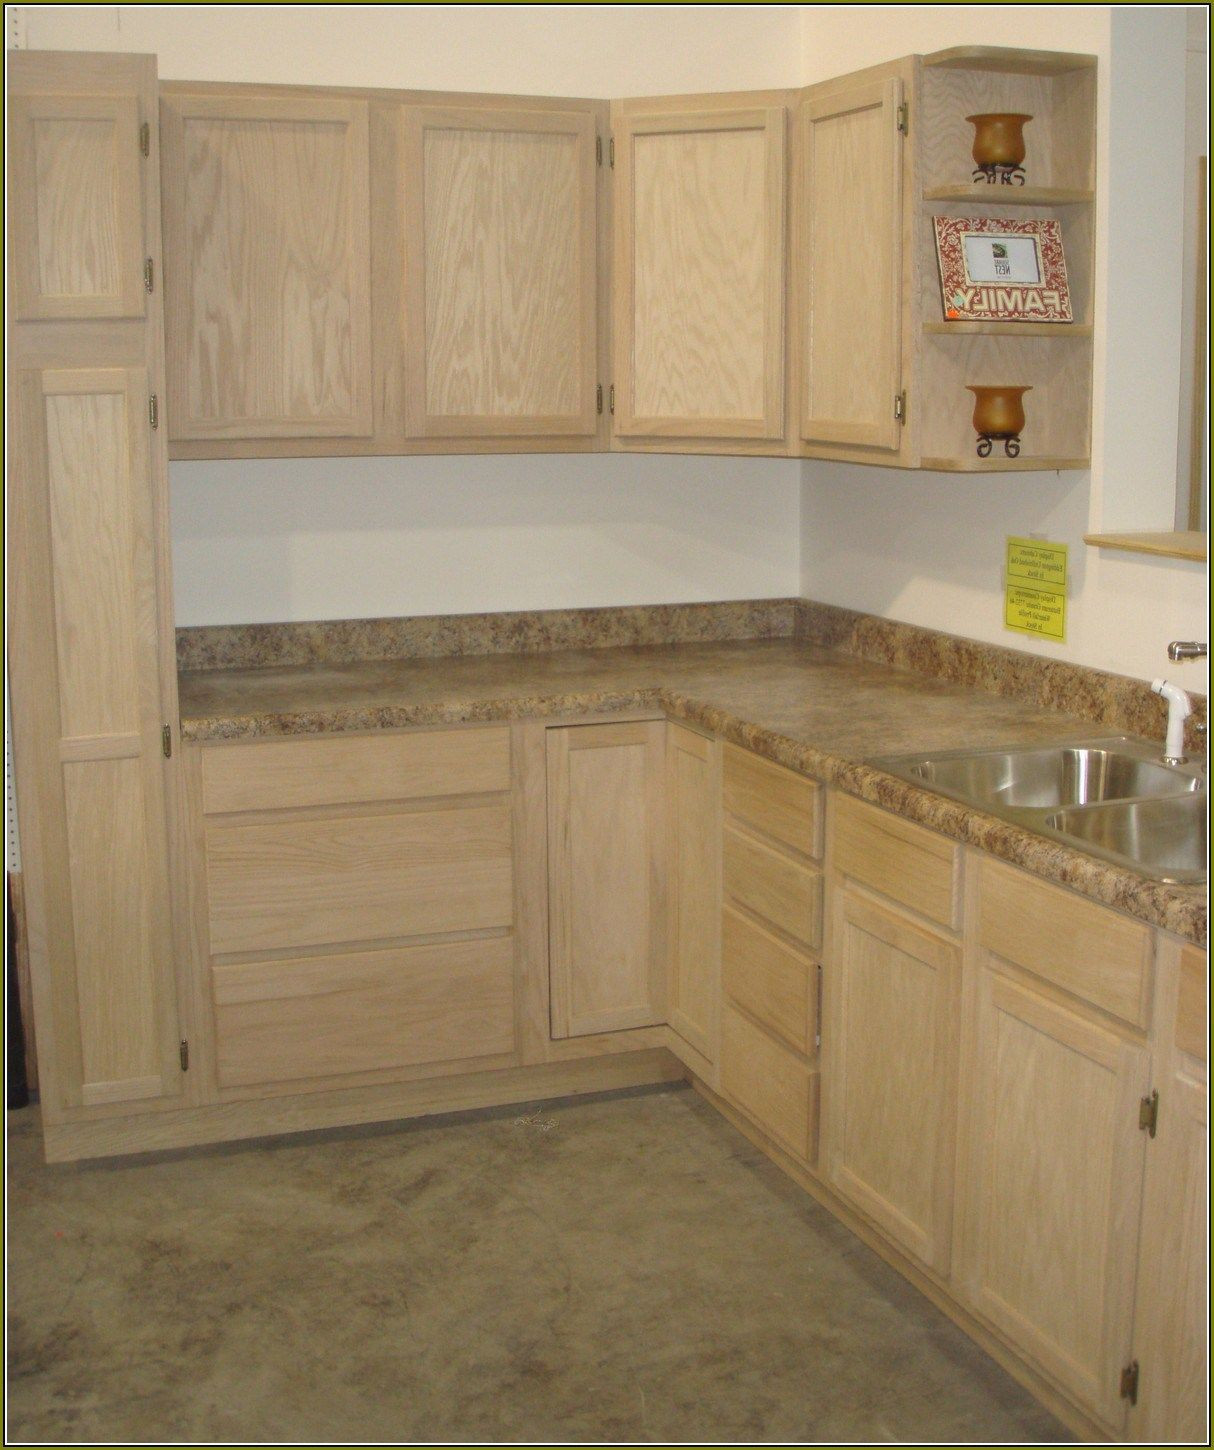 Unfinished Kitchen Cabinets
 Lowes Unfinished Kitchen Cabinets In Stock